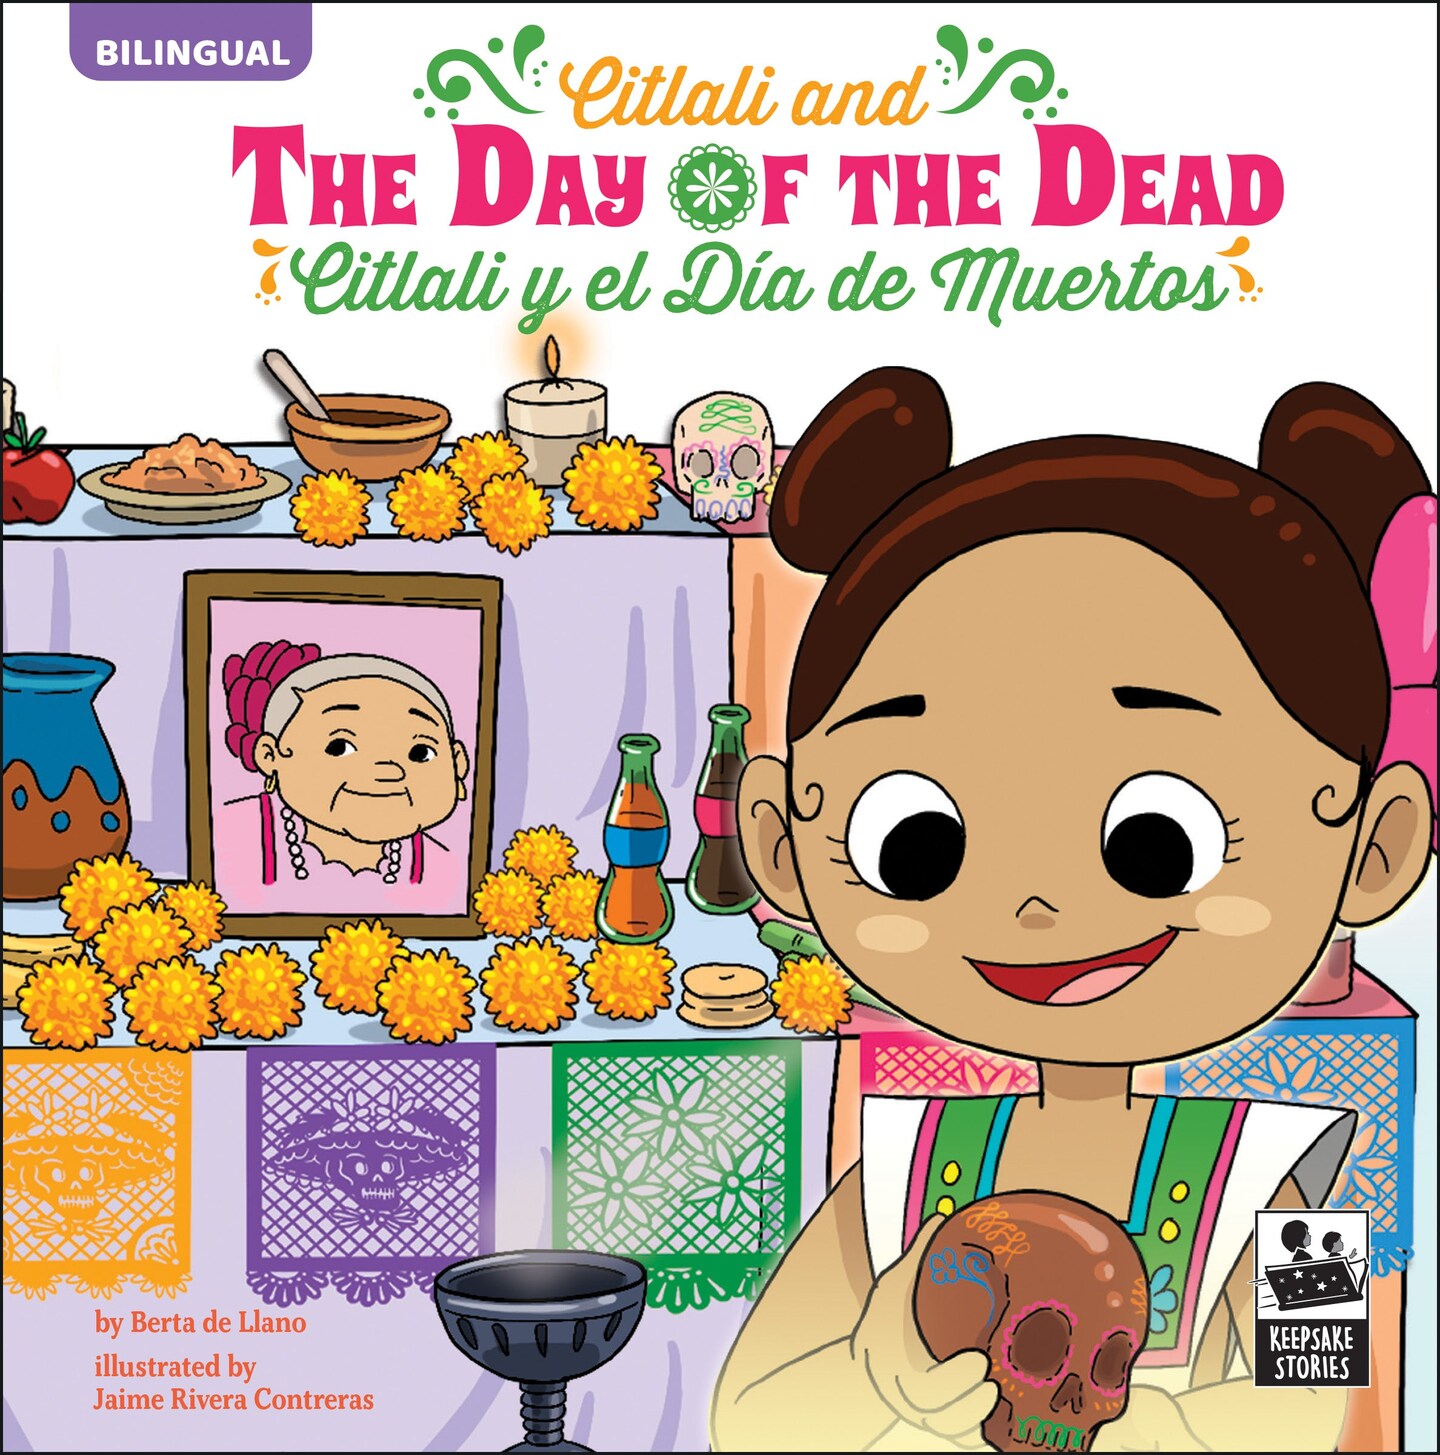 Citlali And The Day Of The Dead&#x2014;Bilingual Children&#x2019;s Book About Mexican Holiday D&#xED;a de los Muertos and Spanish Traditions, PreK-Grade 3 Leveled Readers, Keepsake Stories (32 Pages)